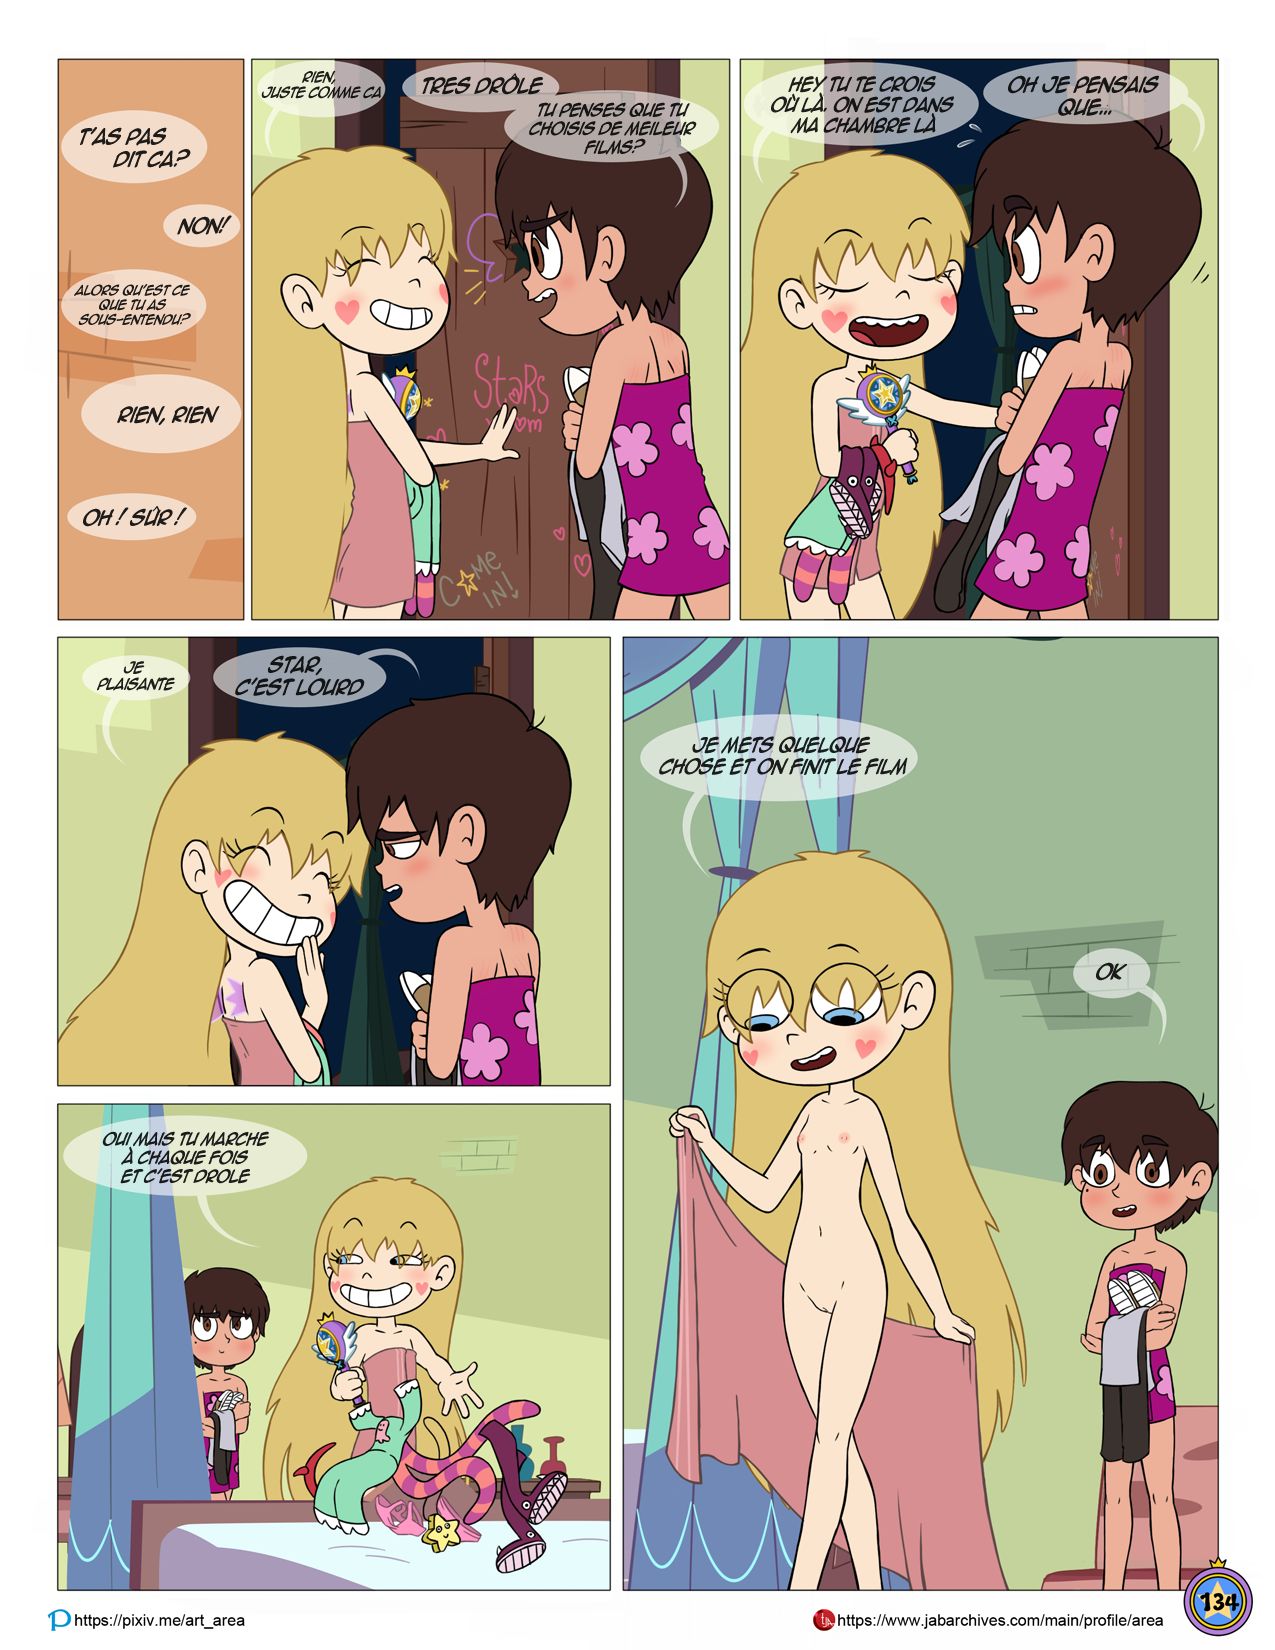 Star Vs The Forces Of Evil Between Friends Porn Comic.